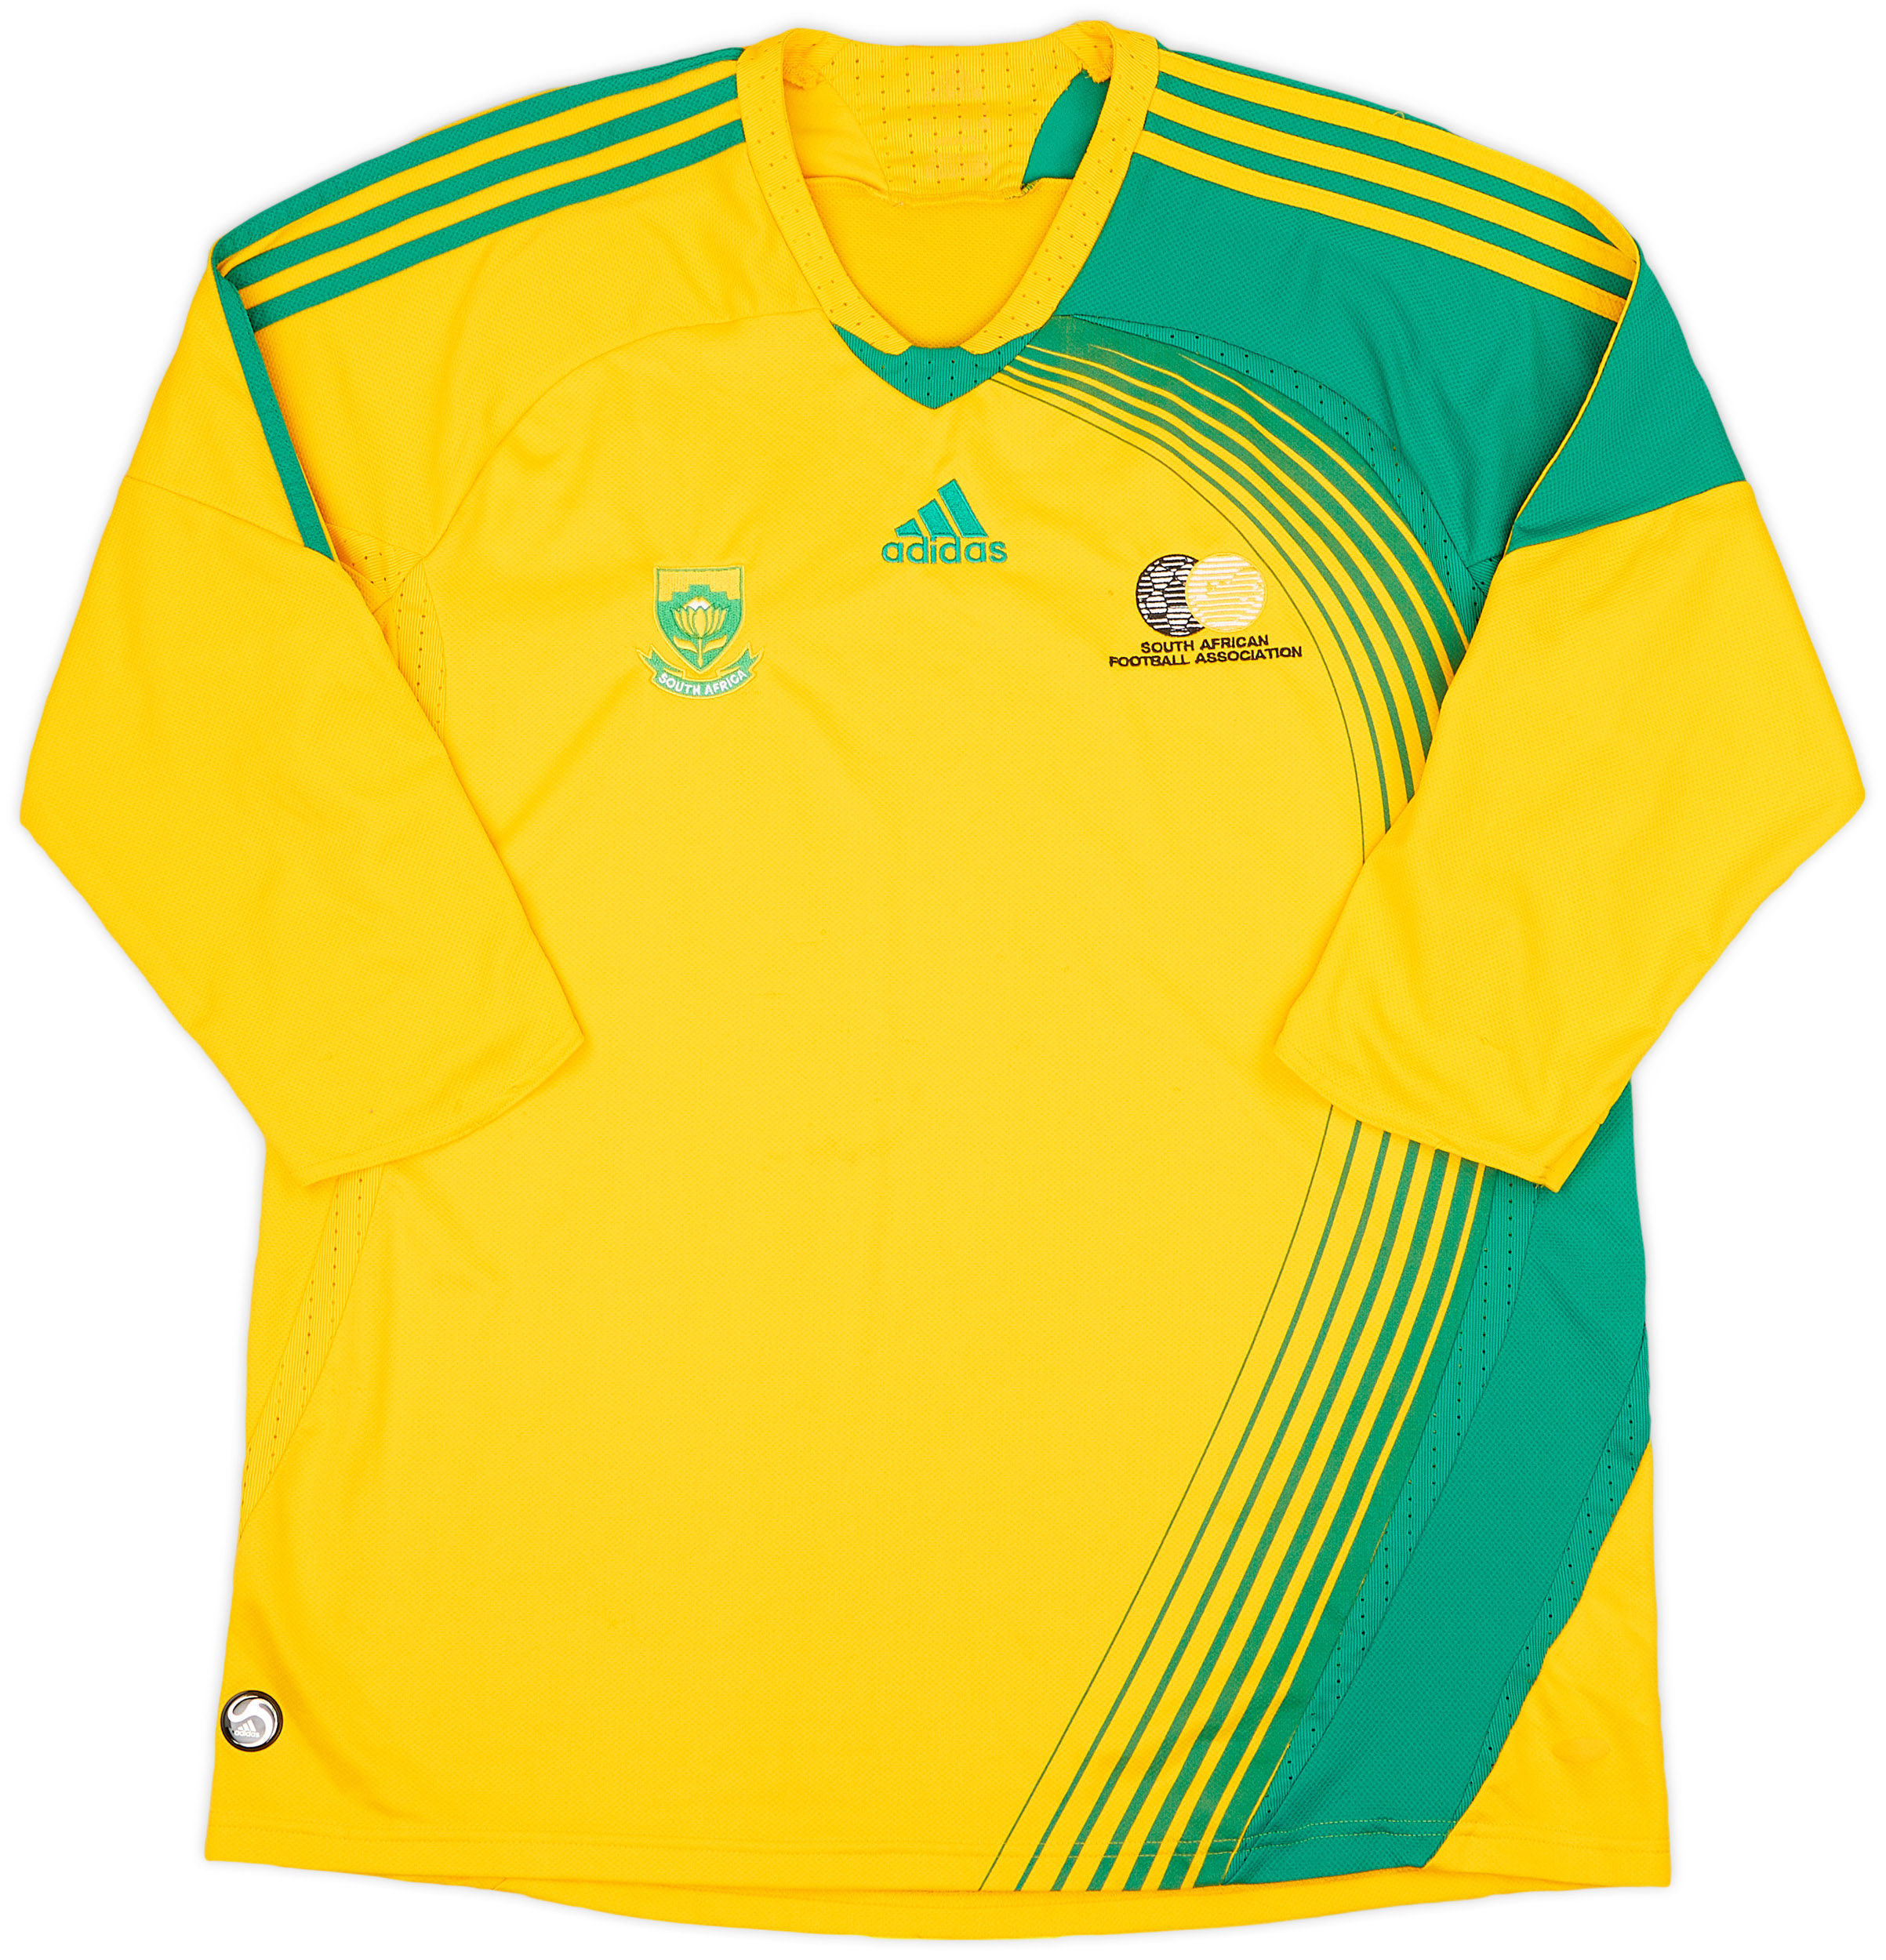 2007-09 South Africa Home Shirt - 9/10 - ()